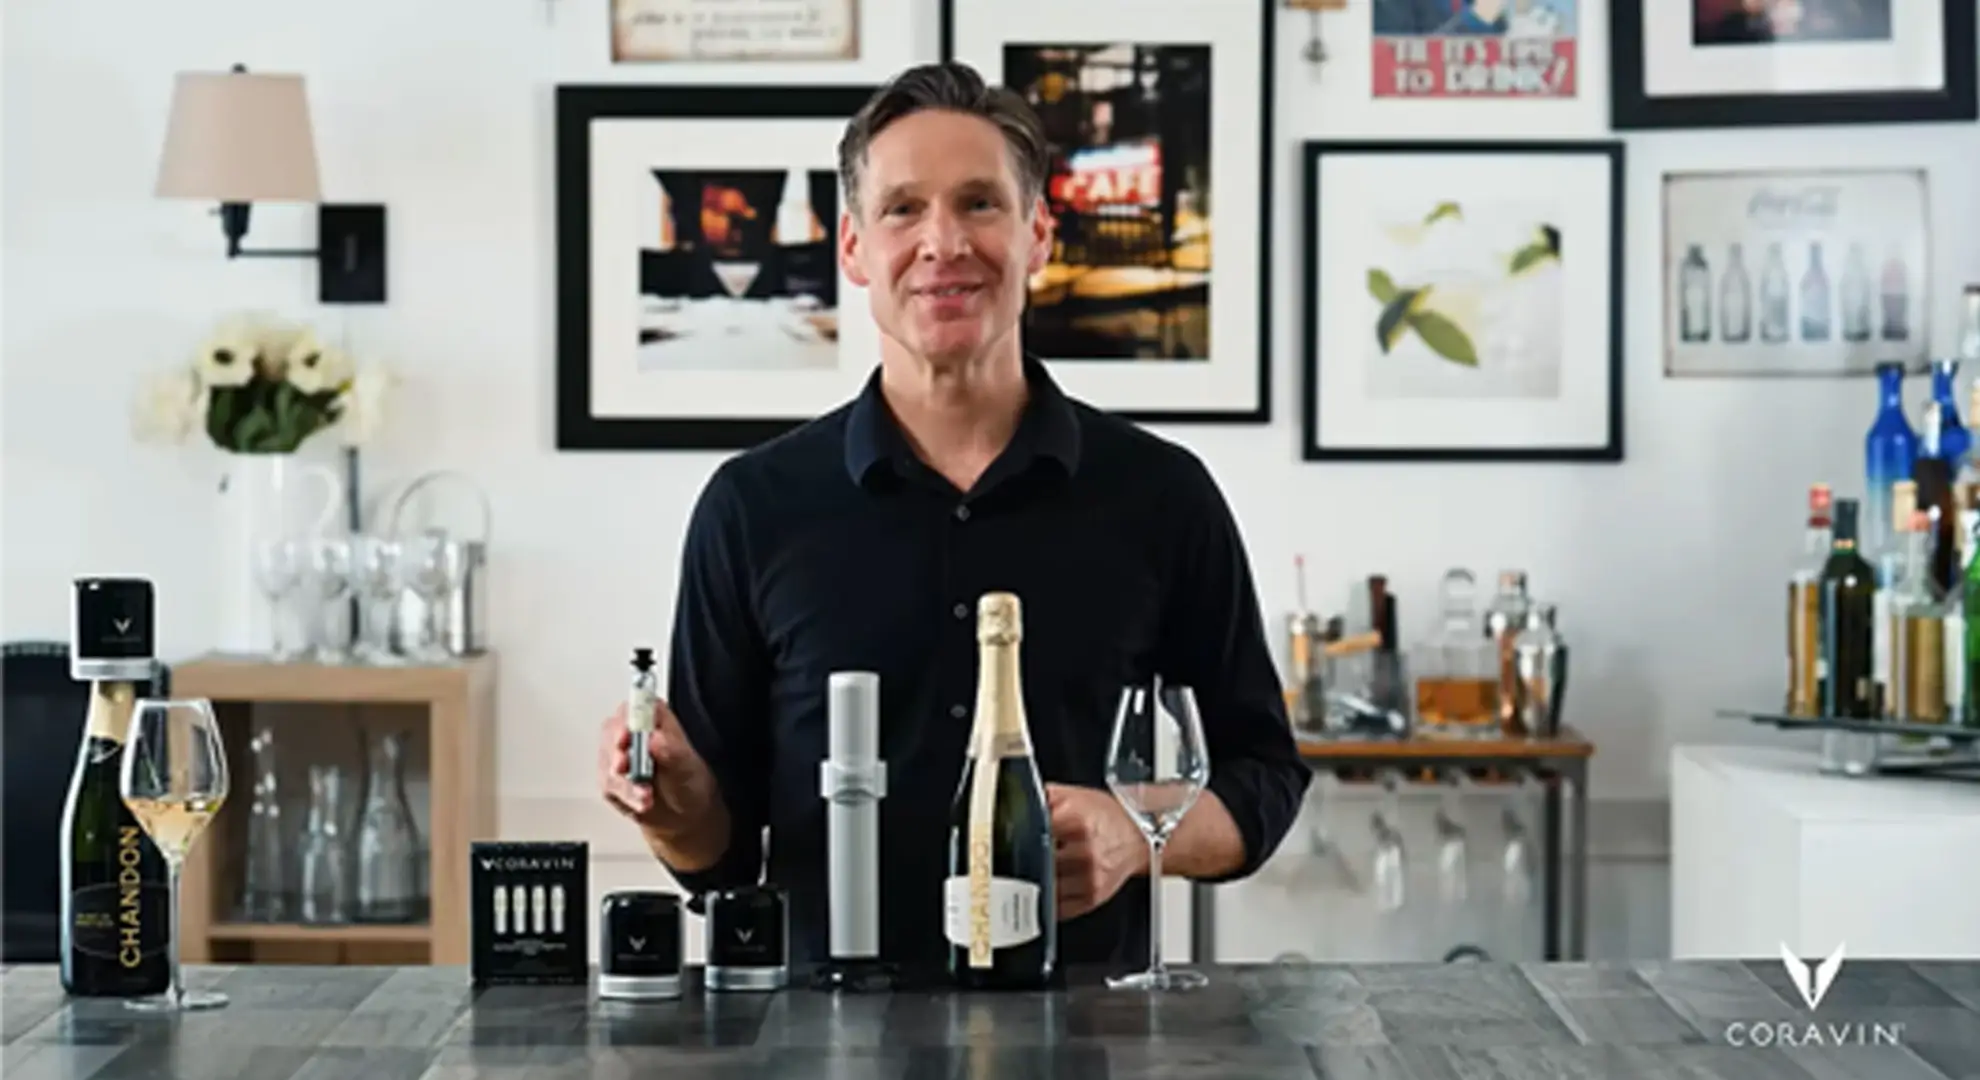 A man standing at a countertop holding a Coravin Pure CO2 Capsule in his hand. The Coravin Sparkling Preservation System is on the table in front of him, along with a bottle of wine. In the background are wine glasses, a bar cart, wine and liquor bottles, and multiple framed images.